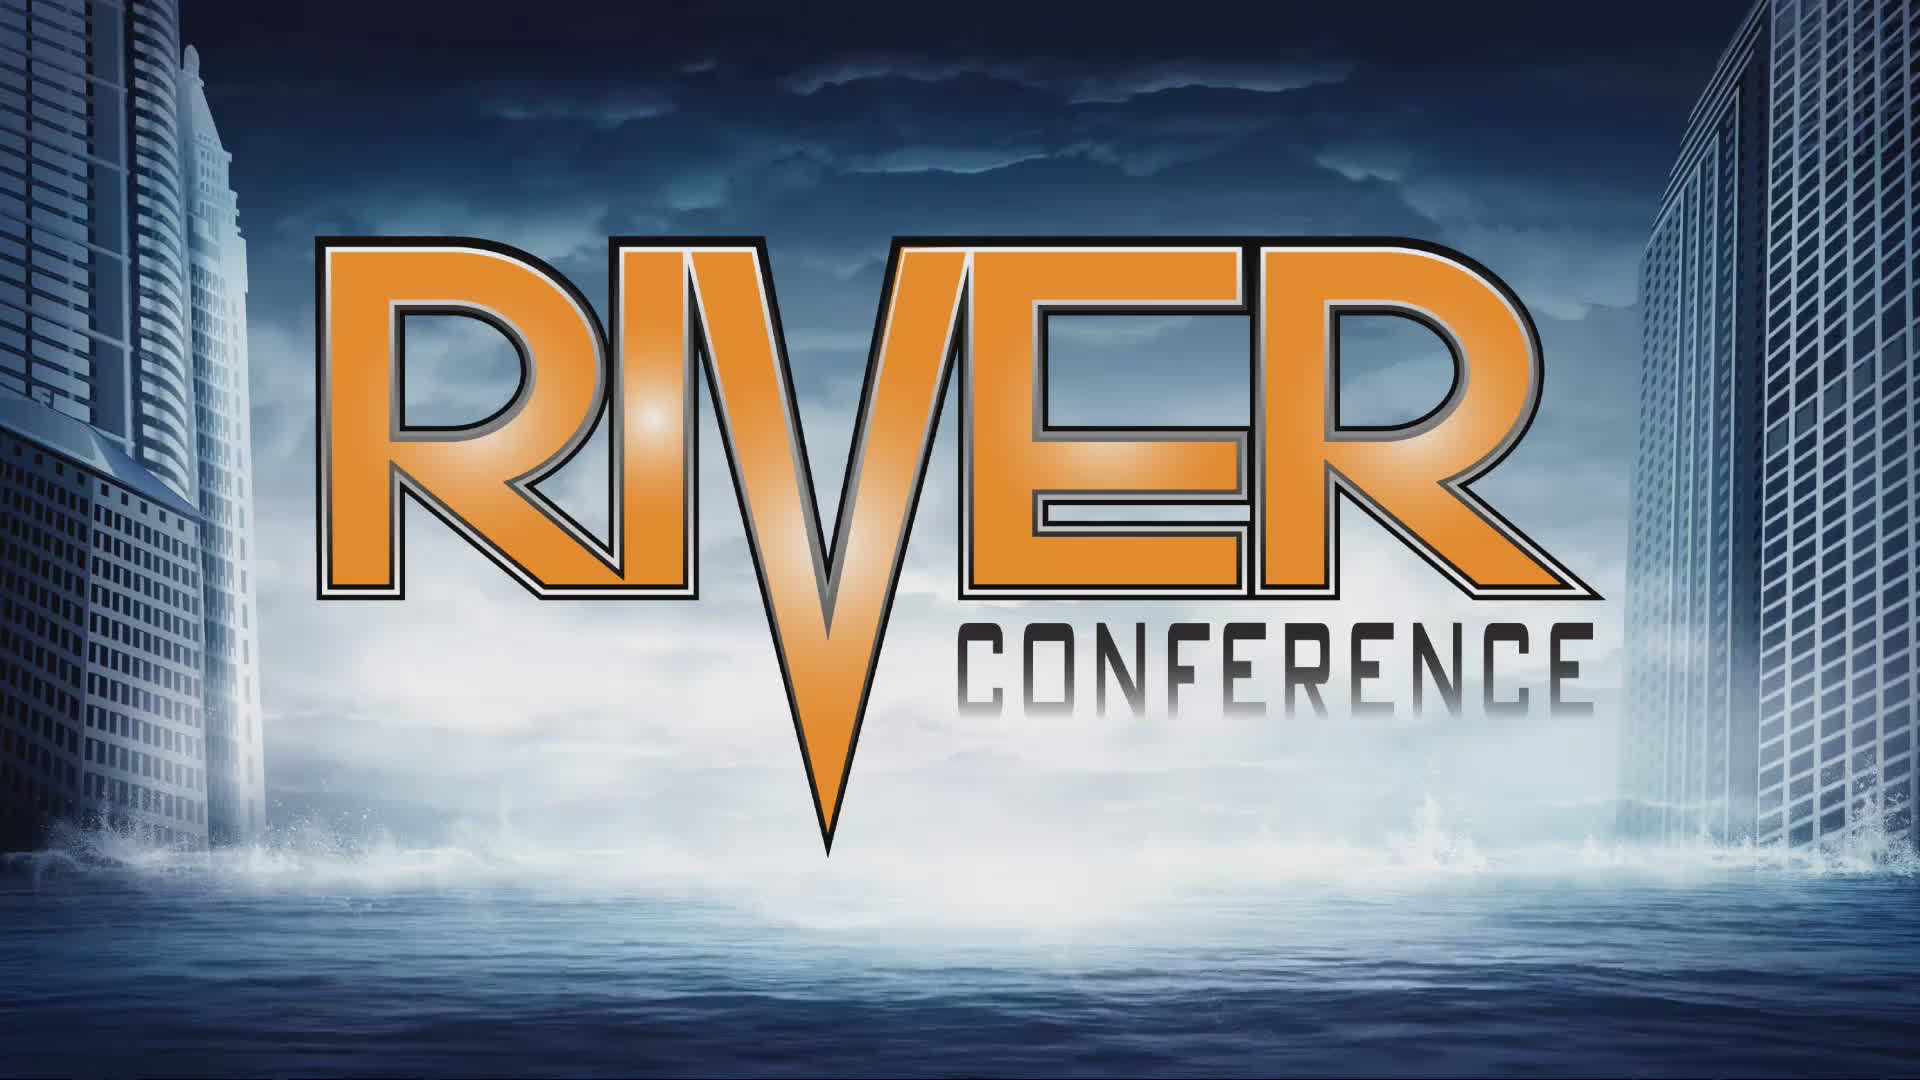 RIVER CONFERENCE 